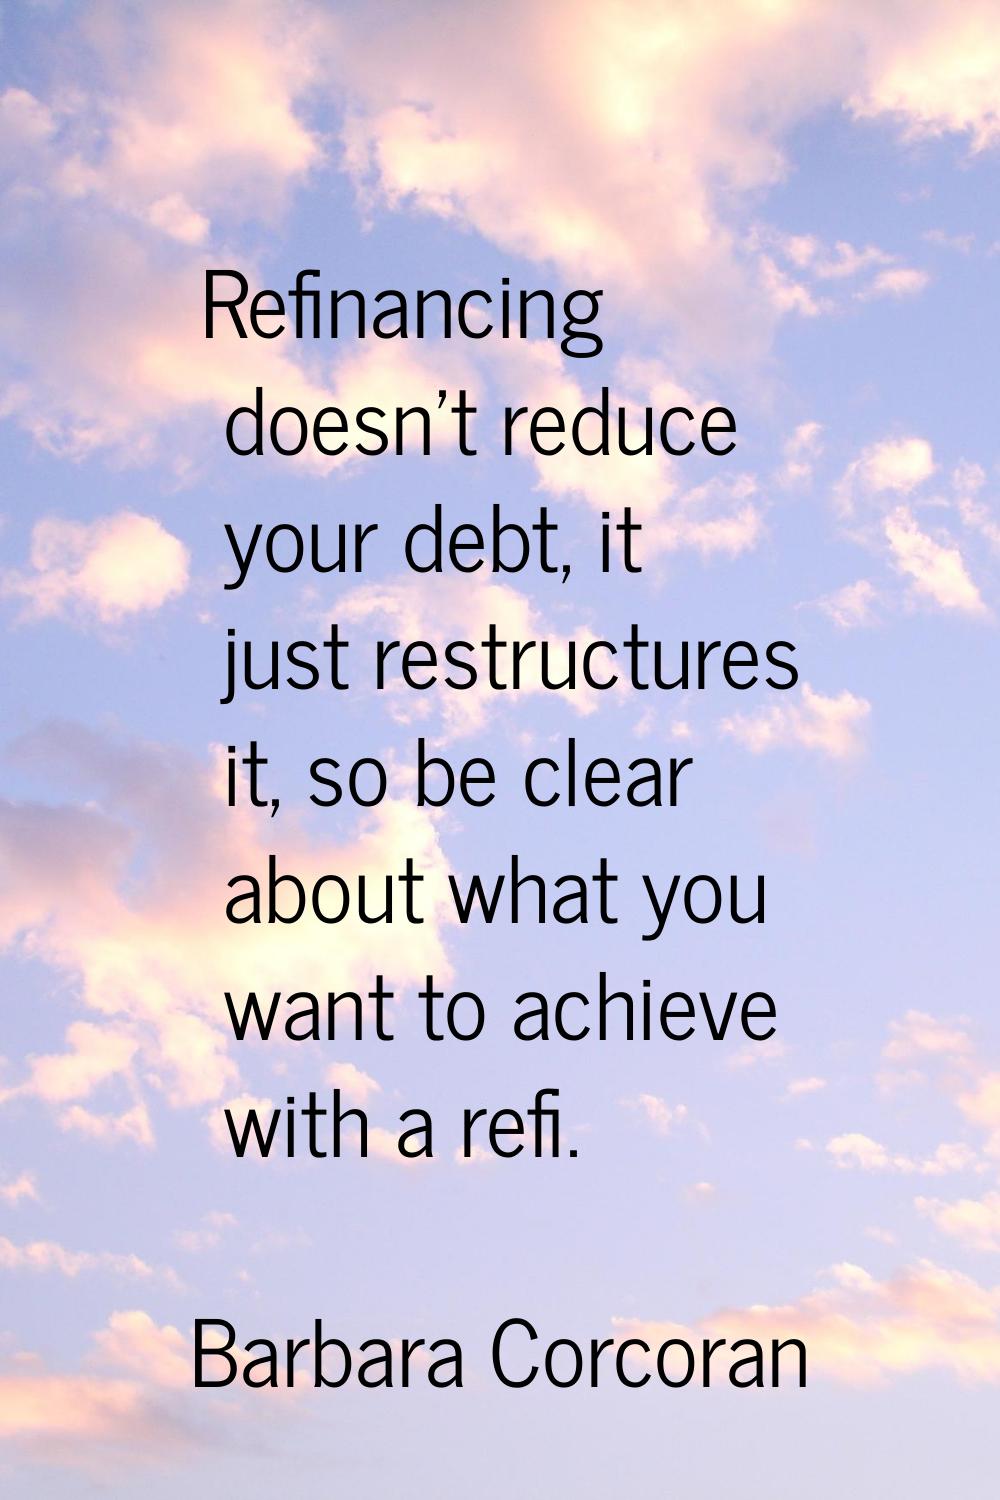 Refinancing doesn't reduce your debt, it just restructures it, so be clear about what you want to a